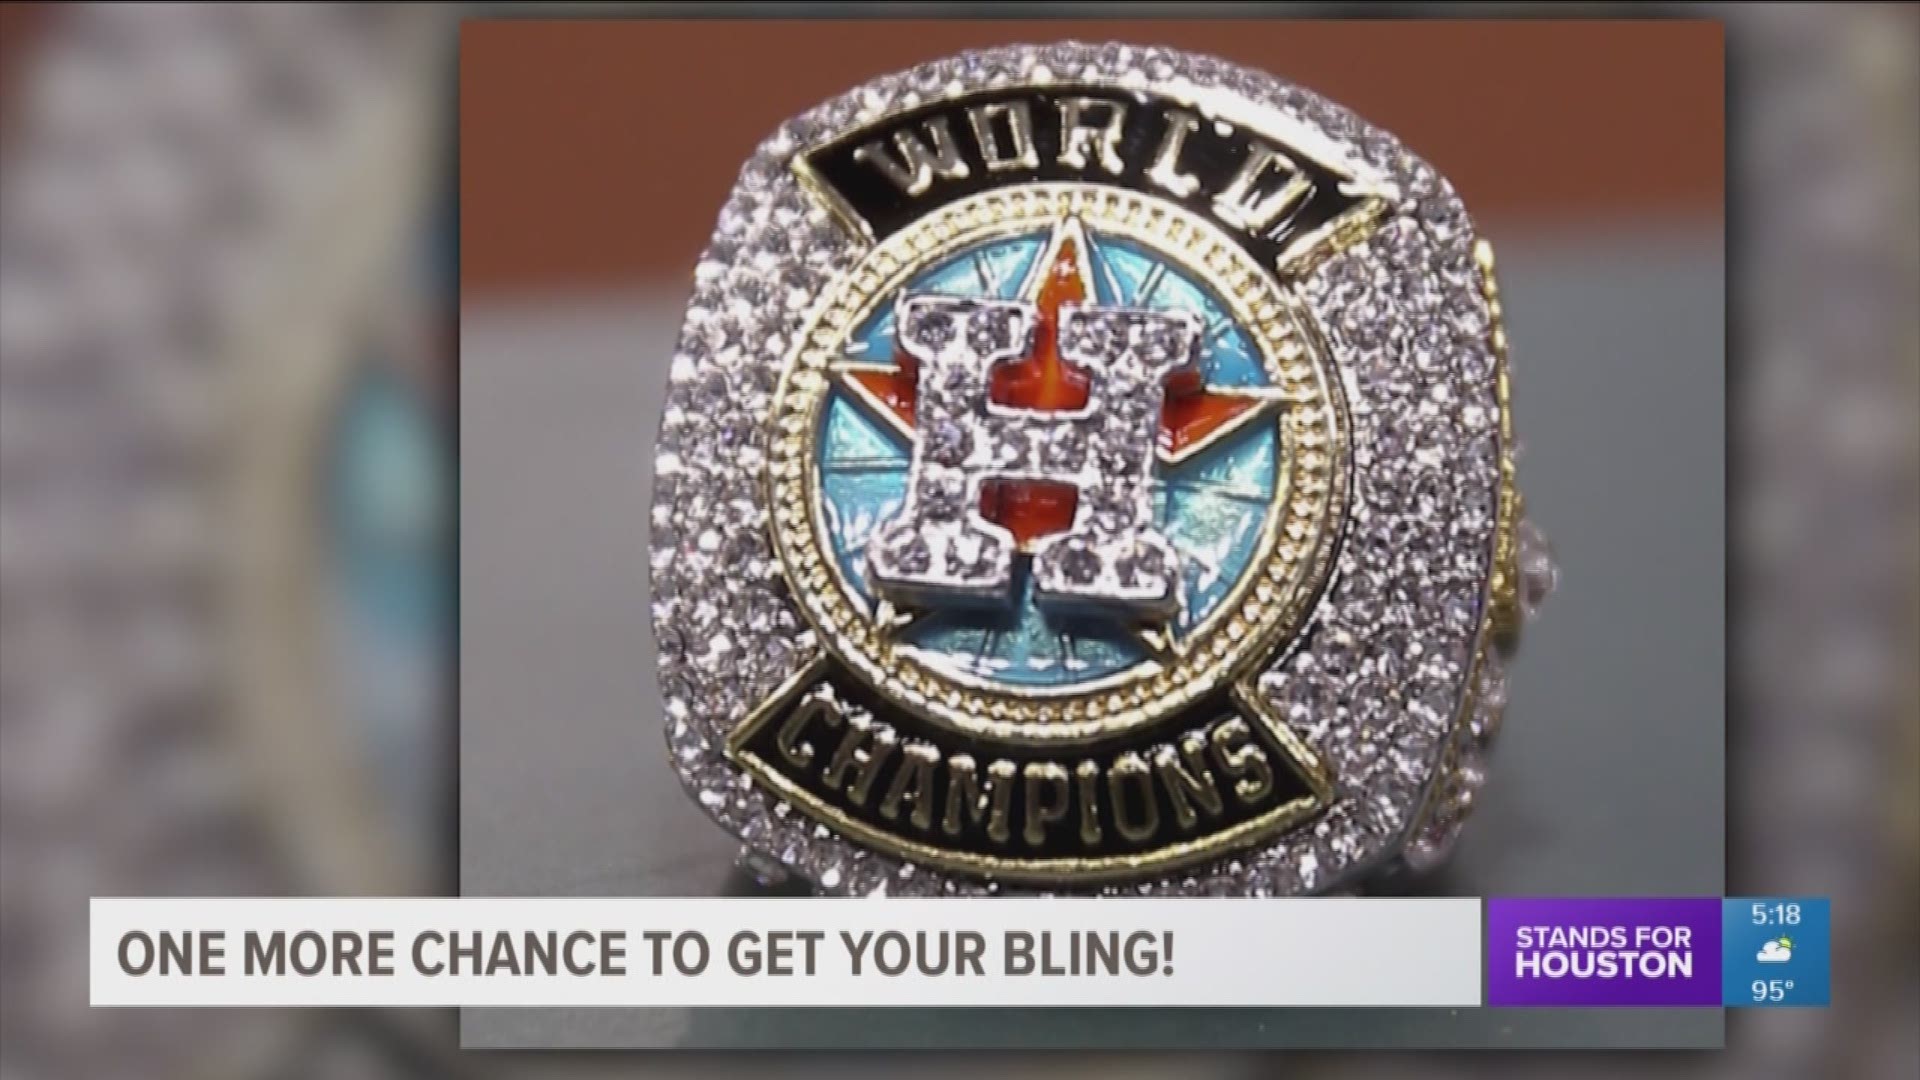 The Astros are offering fans one more chance to get their World Series replica ring on Aug. 27.